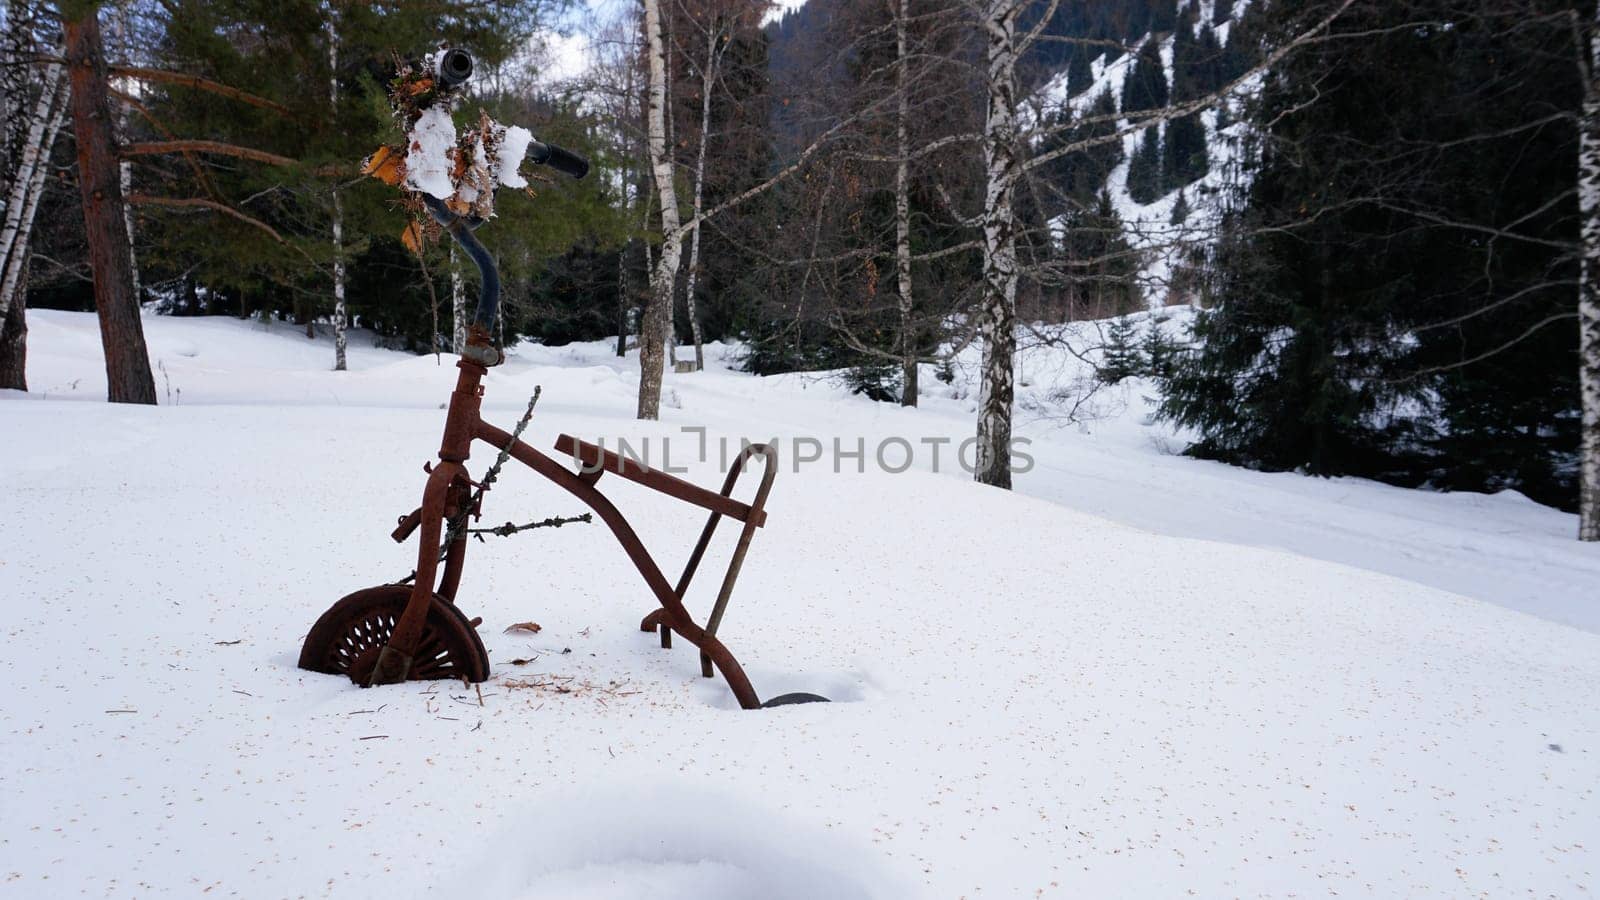 An old rusty tricycle in the winter forest by Passcal